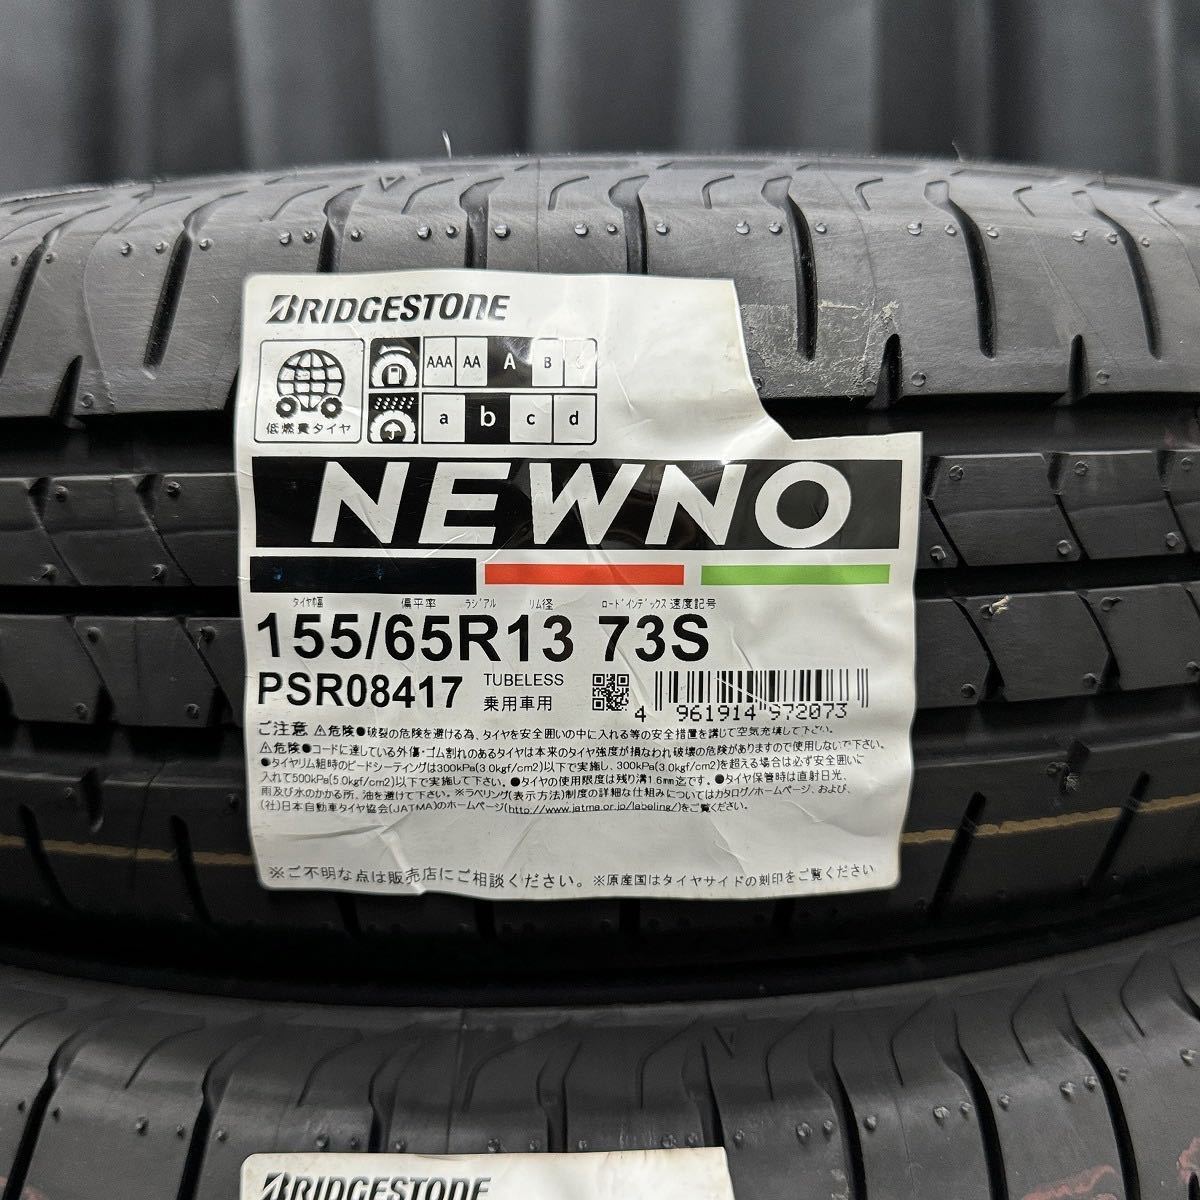  Honda Beat .*23 year made new goods 155/65R13&165/60R14 Bridgestone NEWNO 4ps.@NB240215-B3/13 -inch &14 -inch rom and rear (before and after) unusual shape set inspection :PP1* unused 